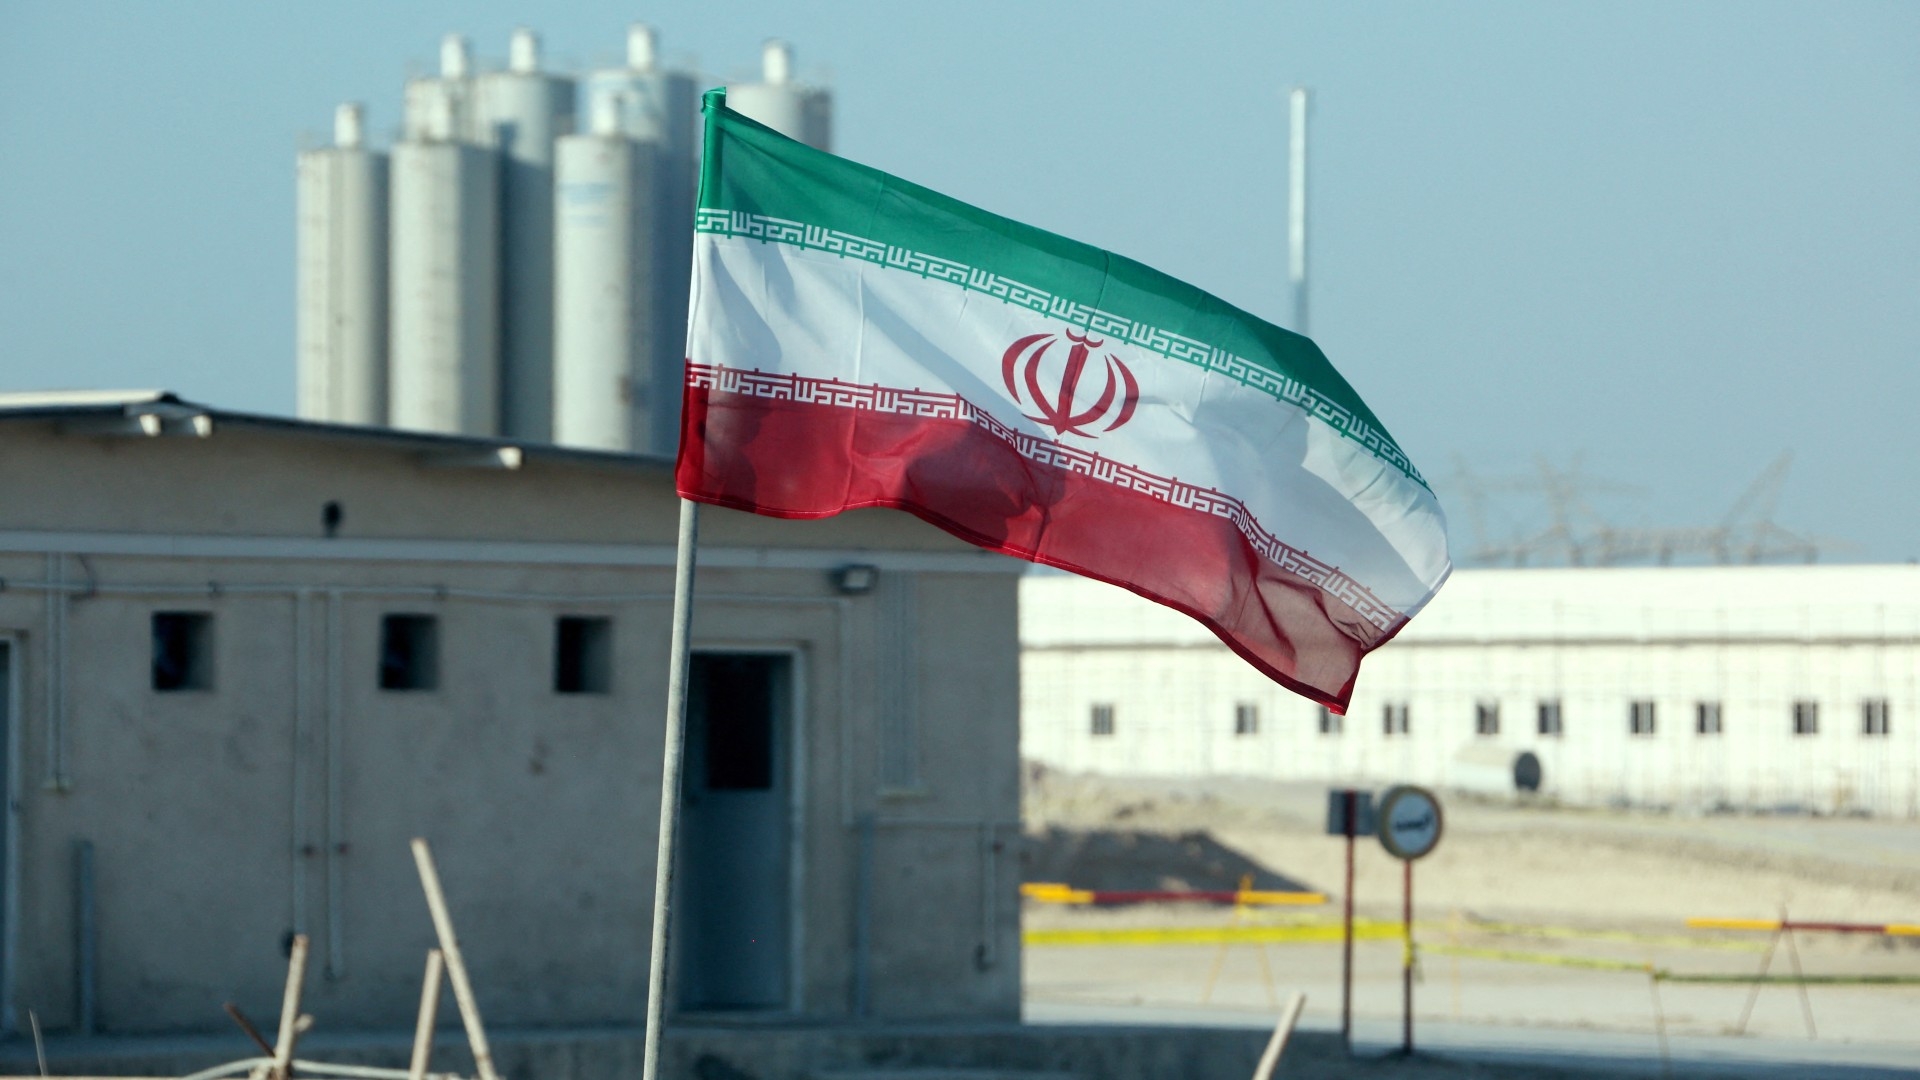 Nonproliferation experts warn Iran has enriched enough up to 60 percent purity, a short technical step from weapons-grade levels of 90 percent.